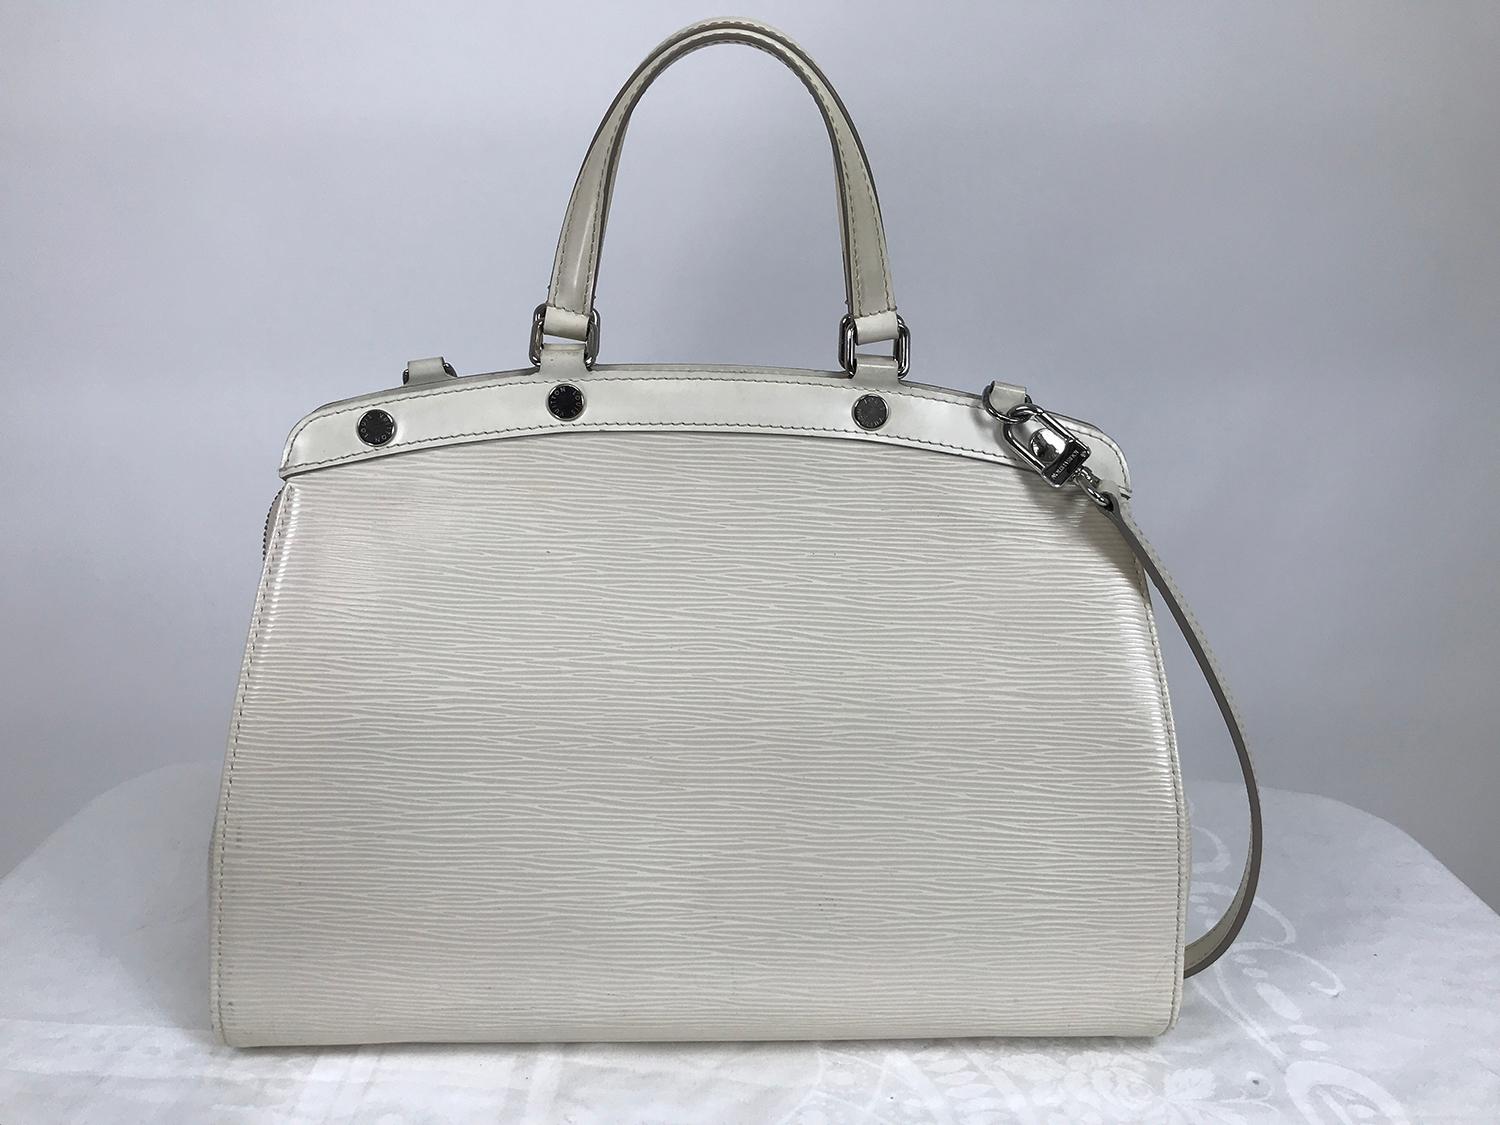 Louis Vuitton Epi Leather Brea shoulder bag mm in Ivory . This beautiful pre owned bag is in very good, well cared for condition. It comes with the protector bag and the original box. 
Ivory epi leather with shiny silver logo hardware, the bag has